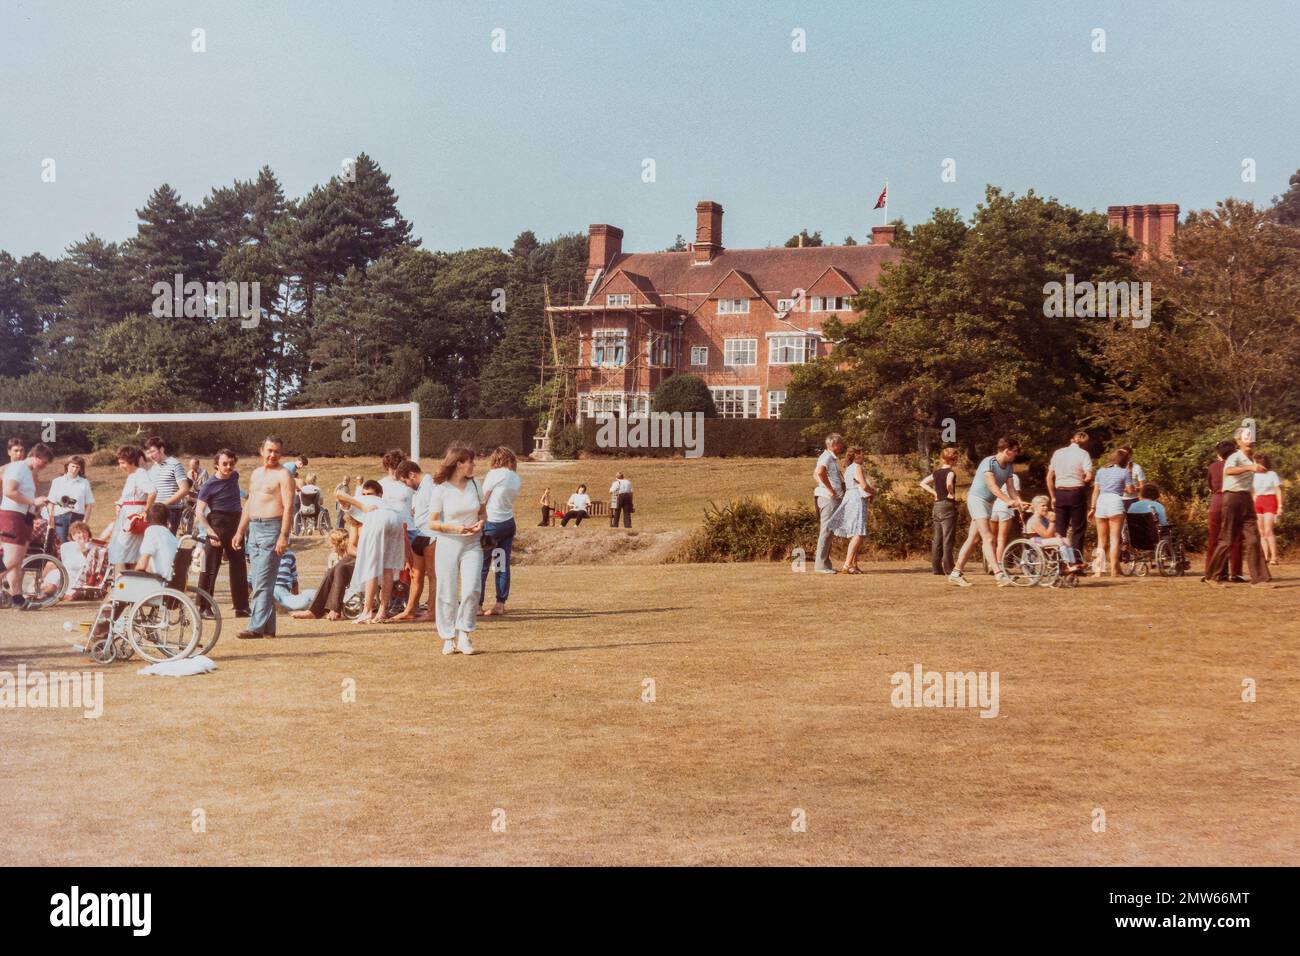 Avon Tyrell Estate, holiday for disabled and able-bodied young people, archival image from the early 1980s, New Forest, Hampshire/Dorset border, England, UK Stock Photo